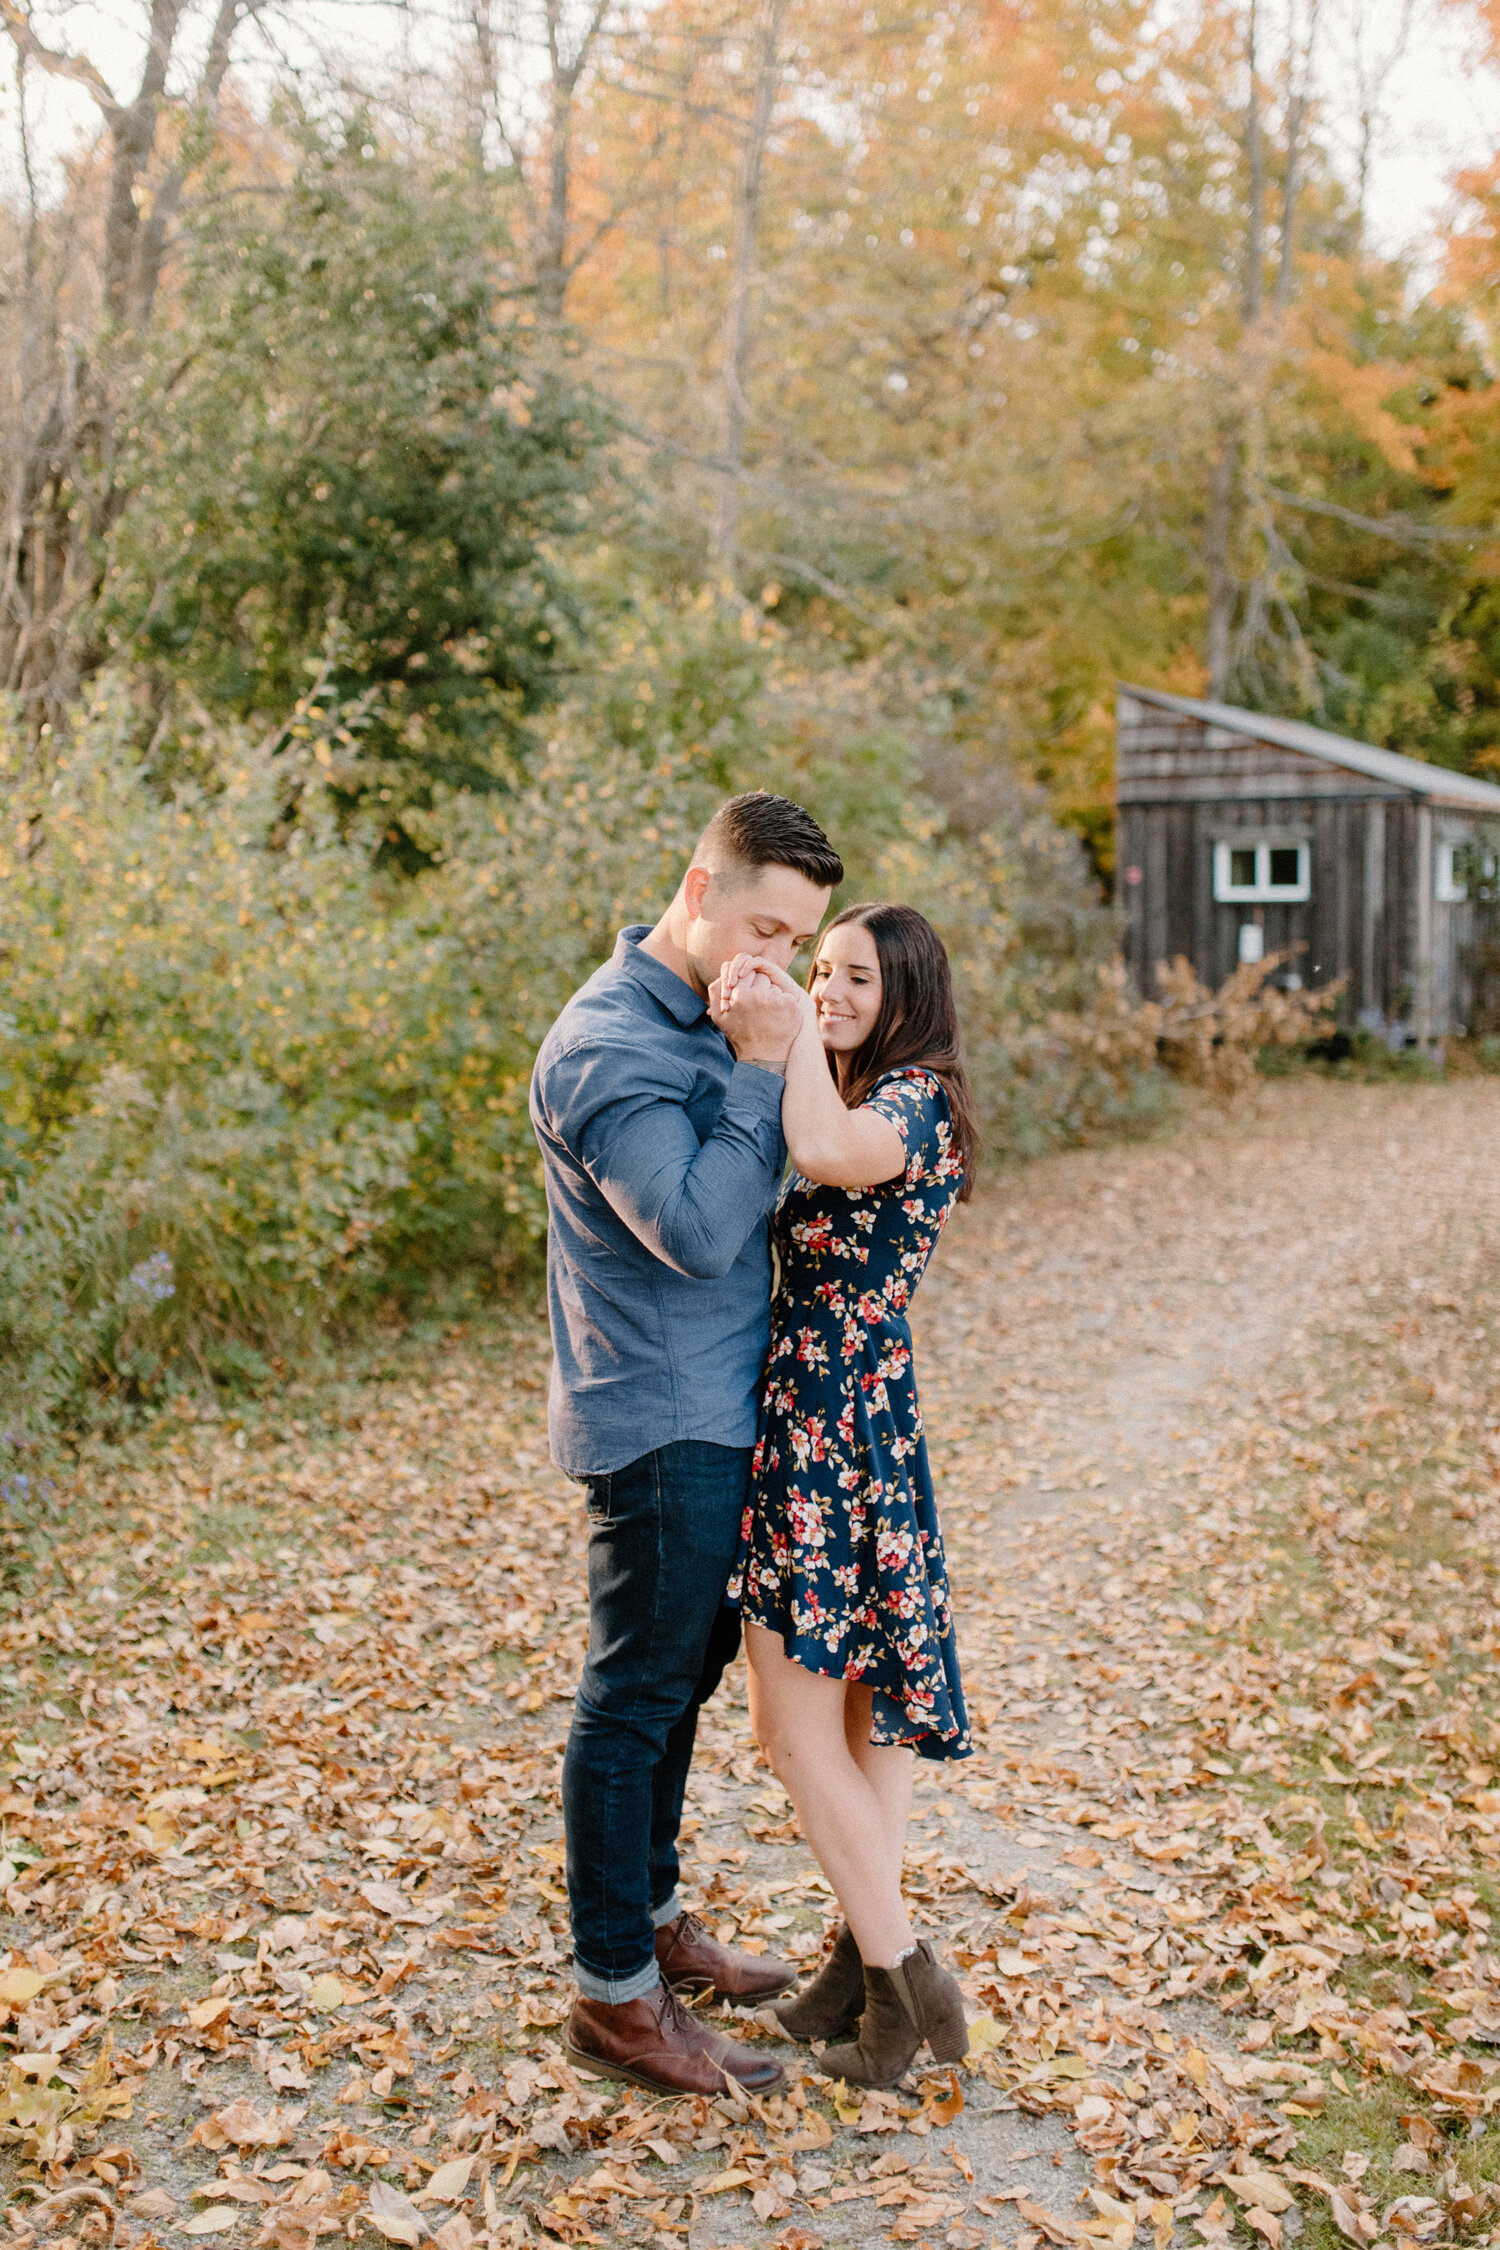  Outside a wooden cabin in the autumn woods of Brockville, Ontario, Chelsea Mason Photography captures this soon-to-be groom kissing his fiance’s hand. womens navy floral high low dress with brown suede booties mens denim outfit autumn fallen leaves 